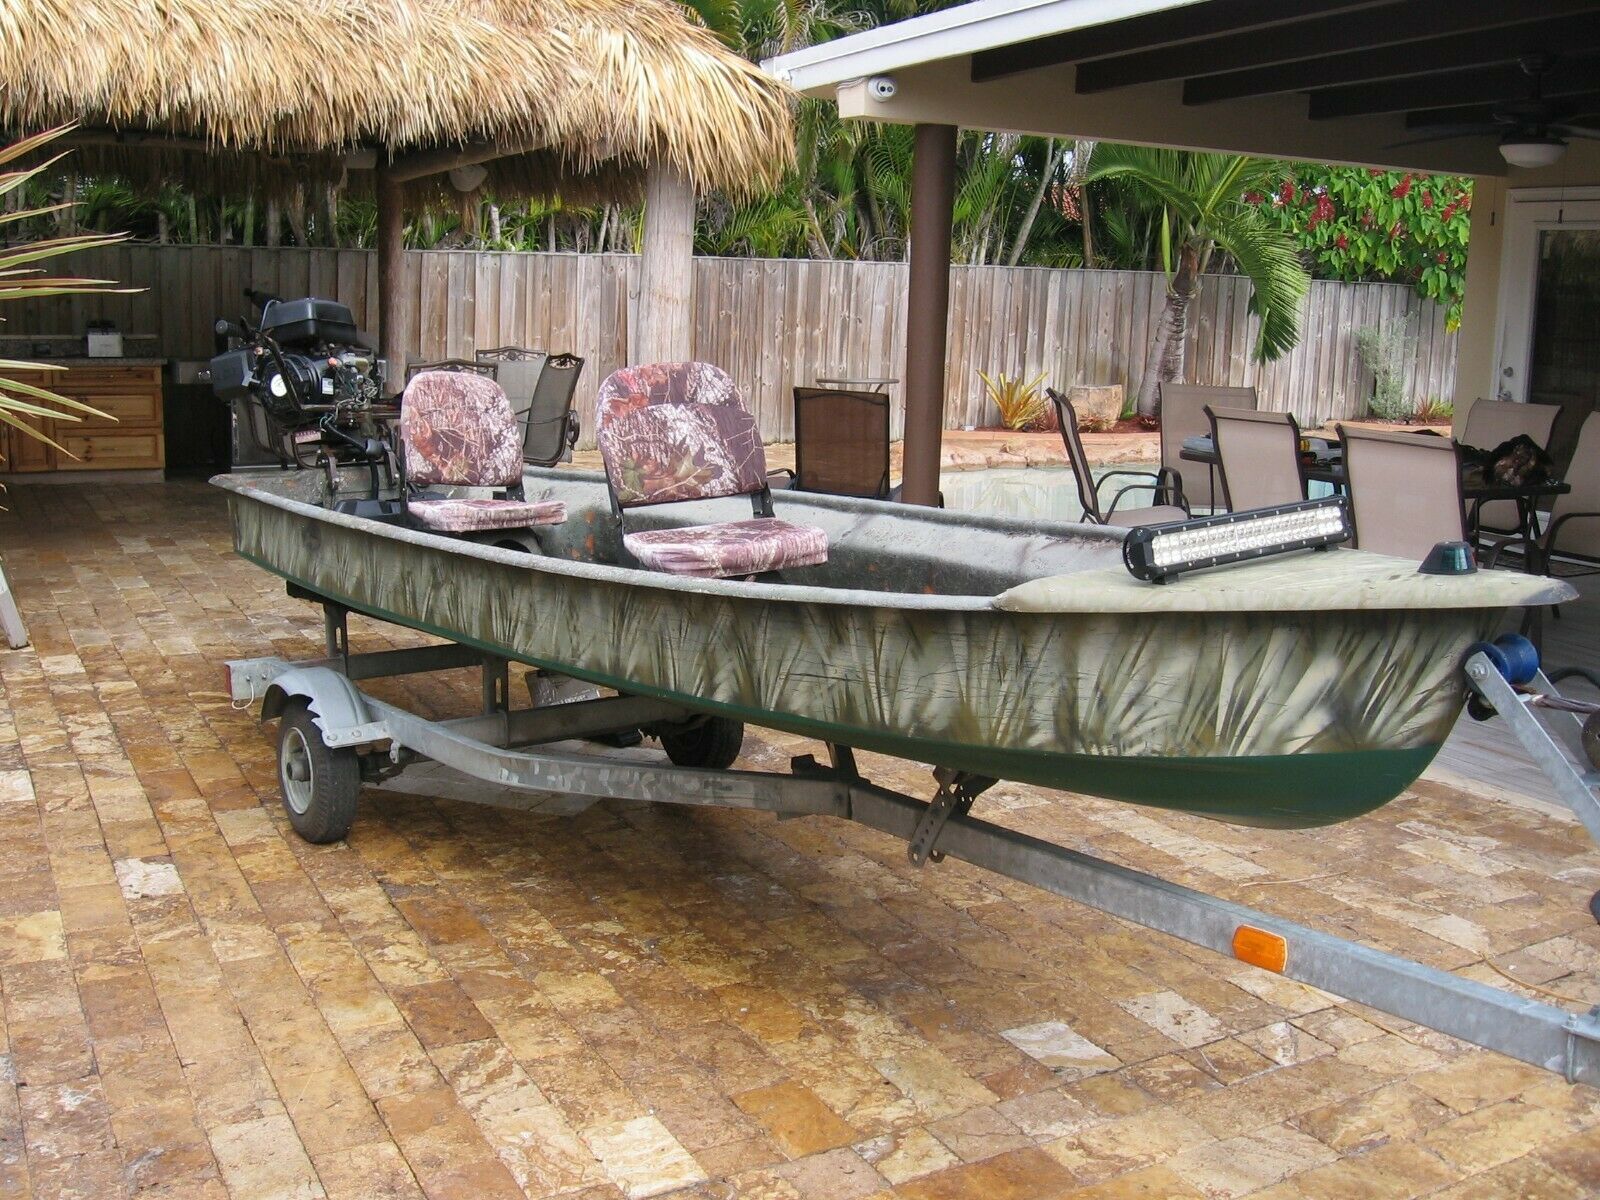 wigeon duck boat wigeon 14.4 2012 for sale for $3,950